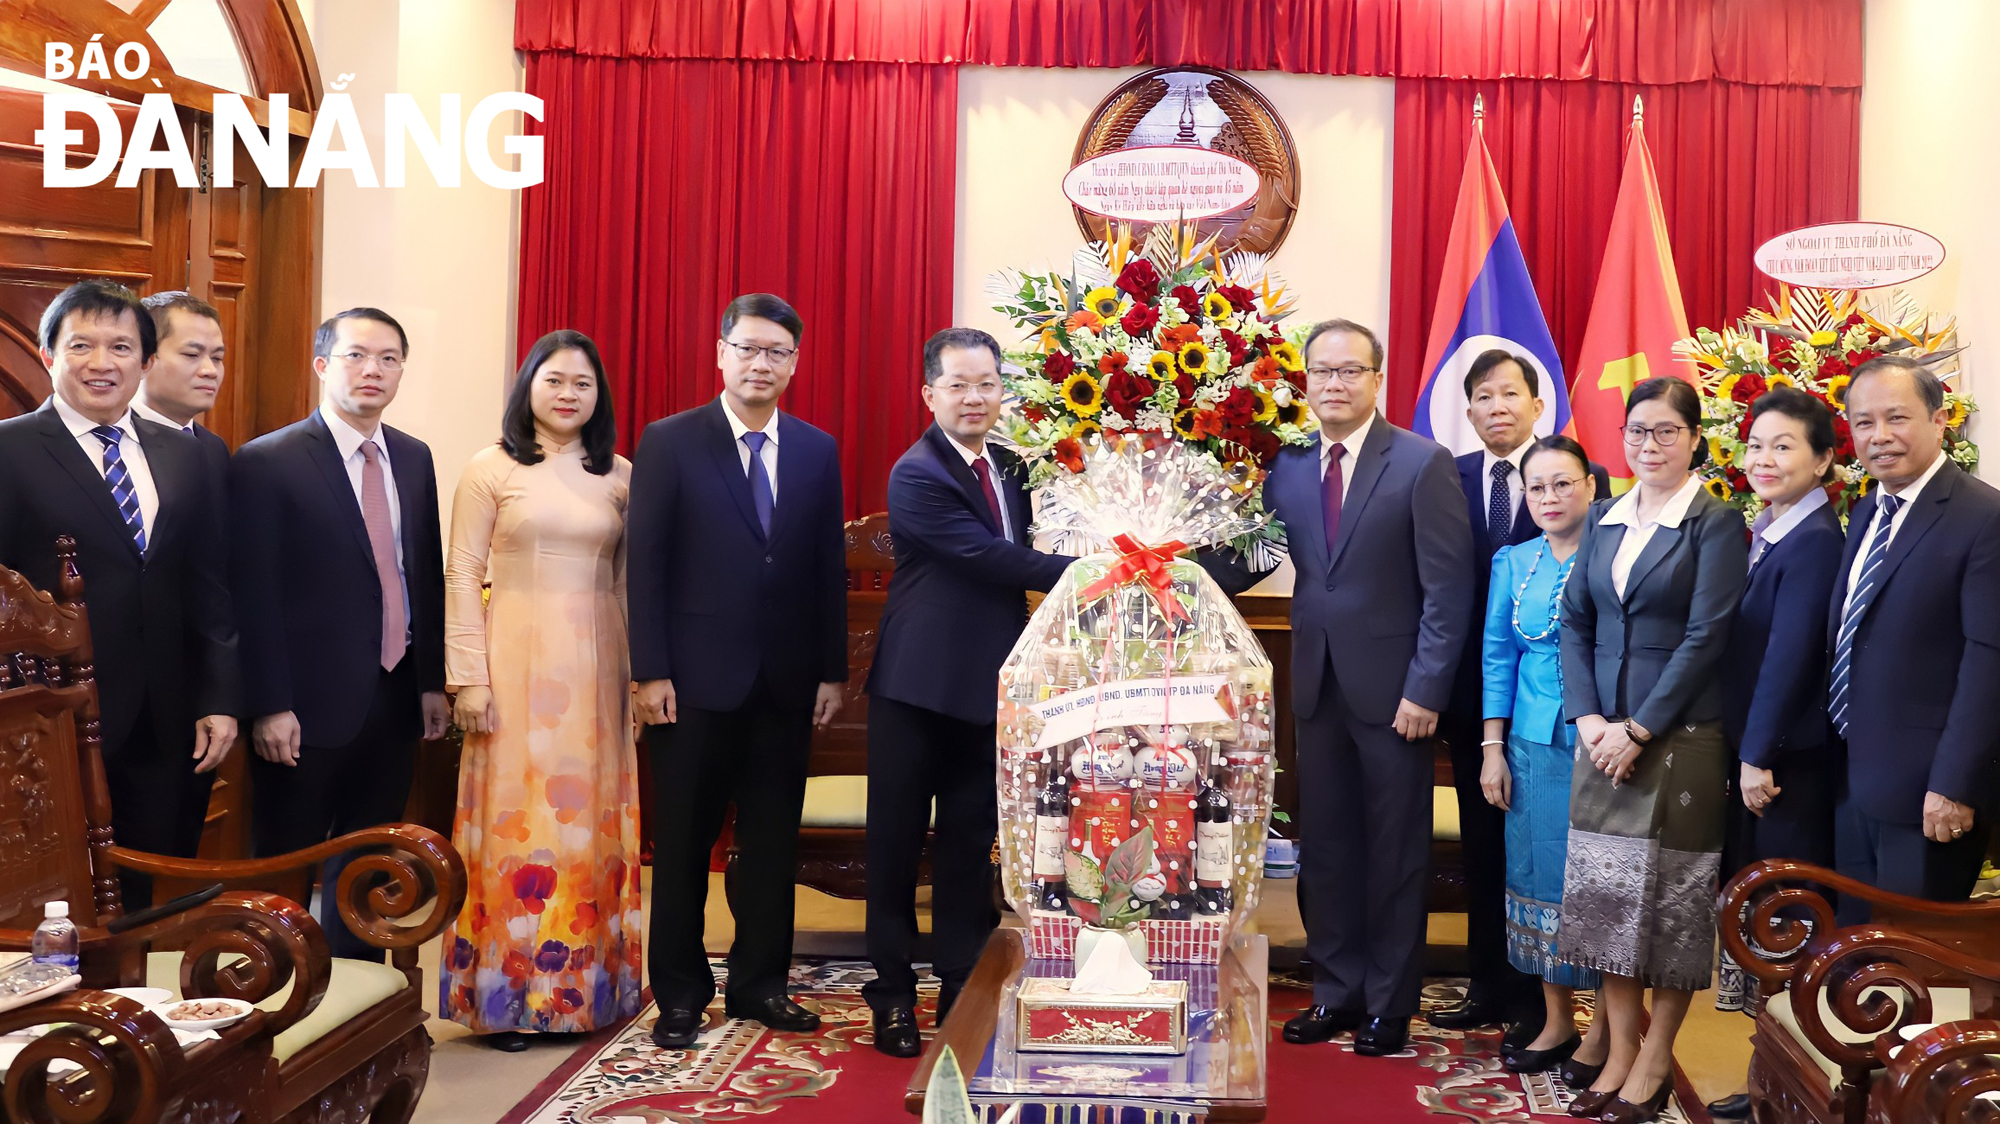 Da Nang Party Committee Secretary Nguyen Van Quang (sixth, left) visits and presents flowers to congratulate the Consulate General of Laos in Da Nang on the occasion of the 60th anniversary of bilateral diplomatic ties (September 5, 1962) and 45 years since the signing of the Treaty of Friendship and Cooperation (July 18, 1977). Photo: NGOC PHU